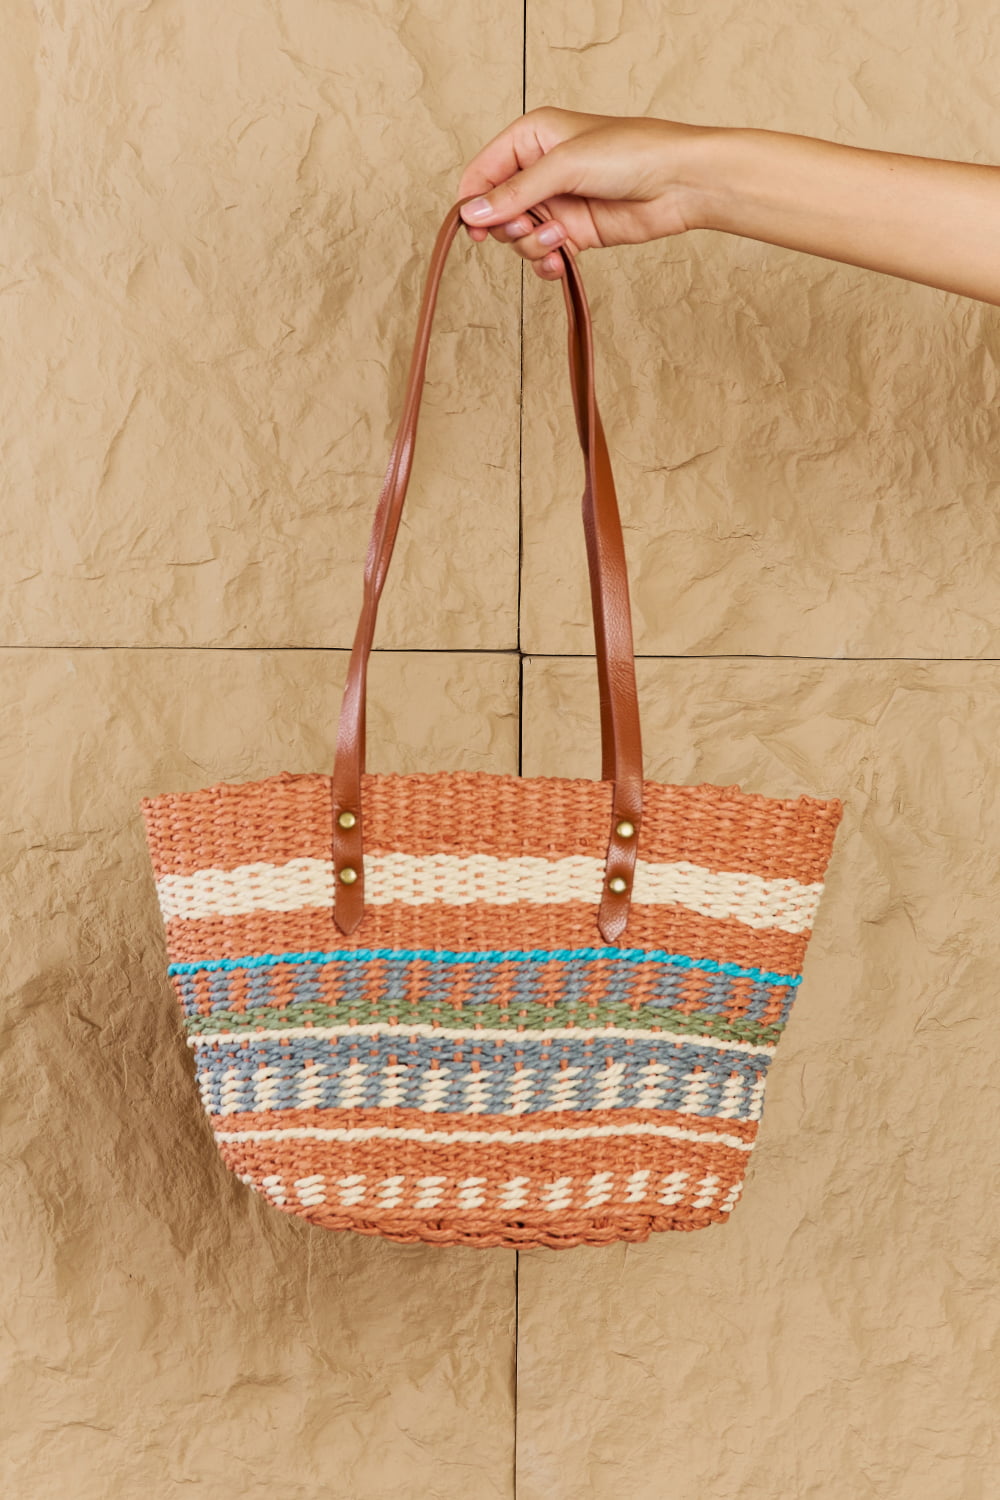 Tan Fame By The Sand Straw Braided Striped Tote Bag Sentient Beauty Fashions *Accessories